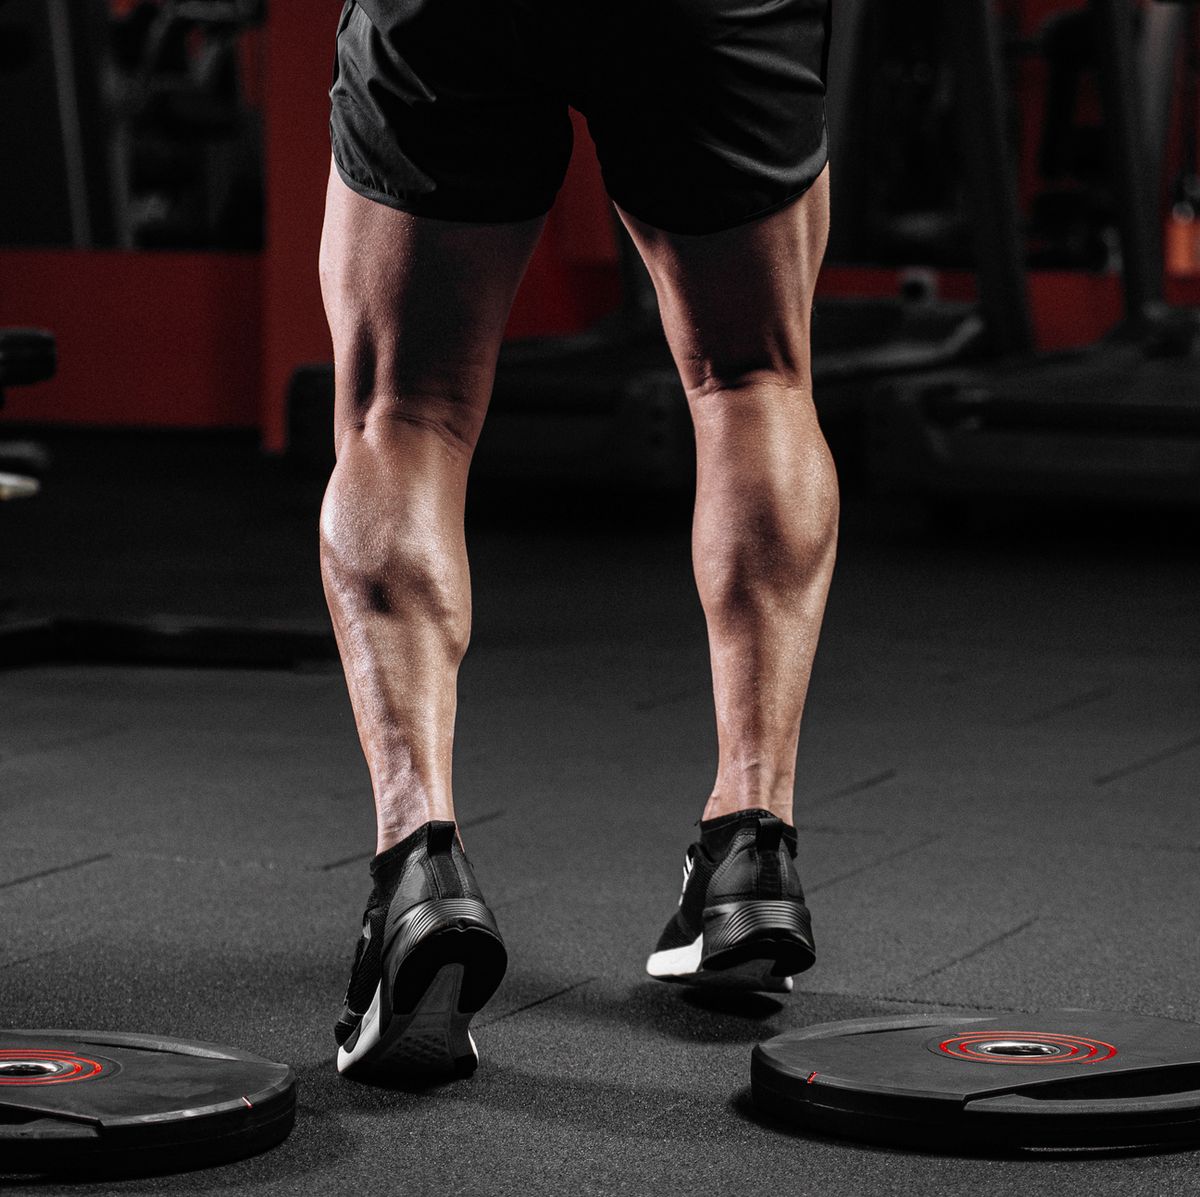 What Happens When You Train Calves Every Day?